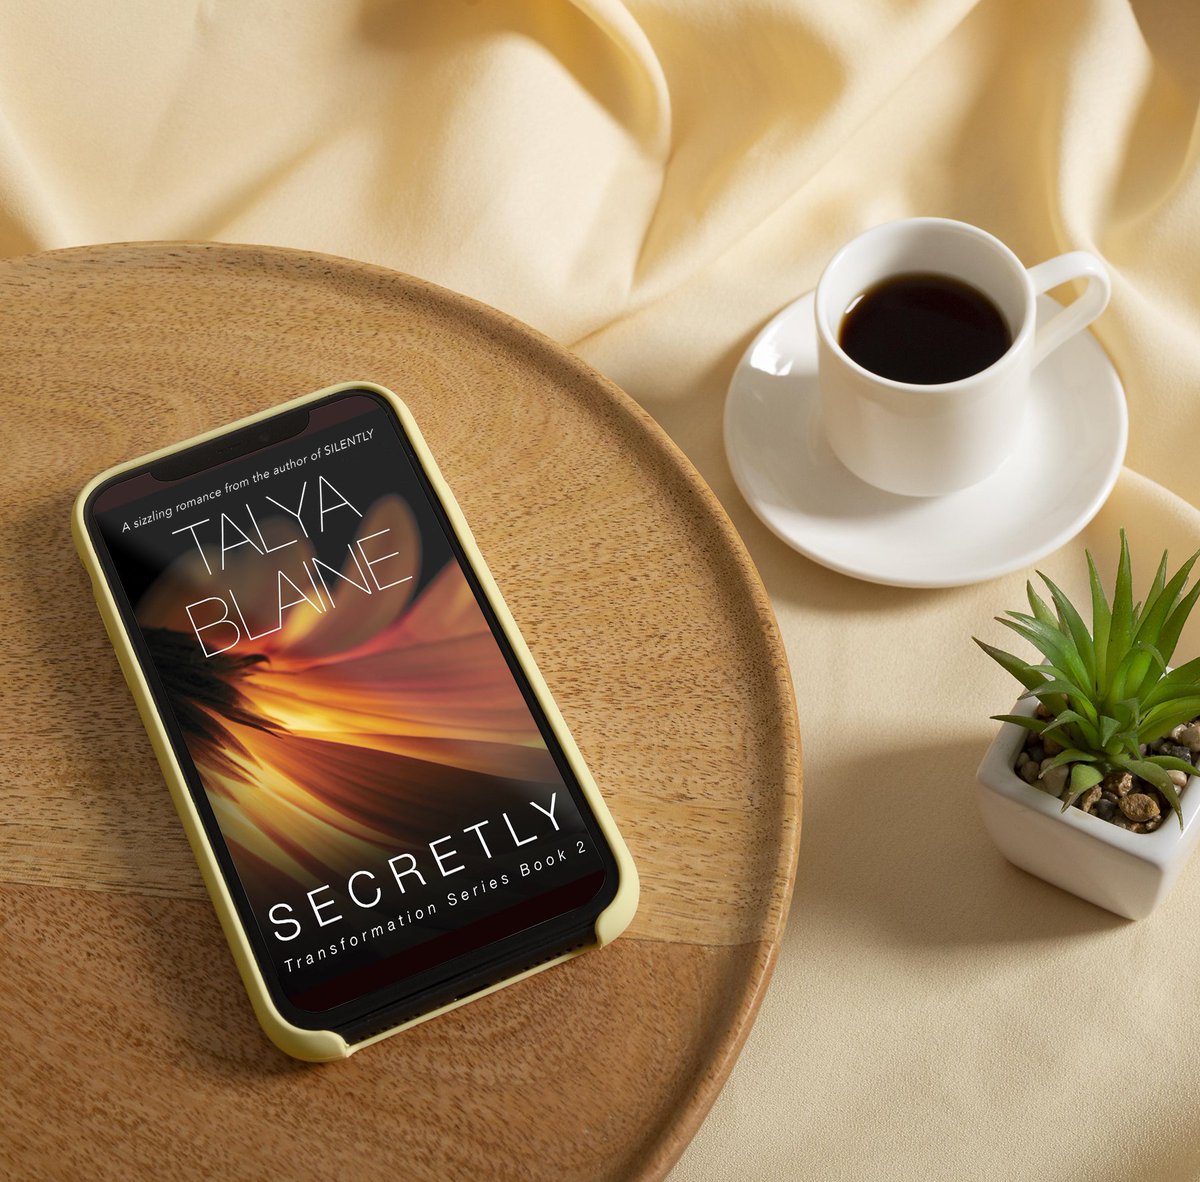 bit.ly/3SuB8jC
⁣⁣
Secretly by Talya Blaine is book 2 in the  Transformation Series and it's out NOW! 
⁣⁣⁣⁣⁣⁣⁣⁣⁣⁣⁣⁣⁣⁣⁣⁣⁣⁣⁣⁣⁣⁣⁣
#talyablaine #secretly #transformationseries ⁣⁣⁣ @XpressoTours⁣⁣⁣